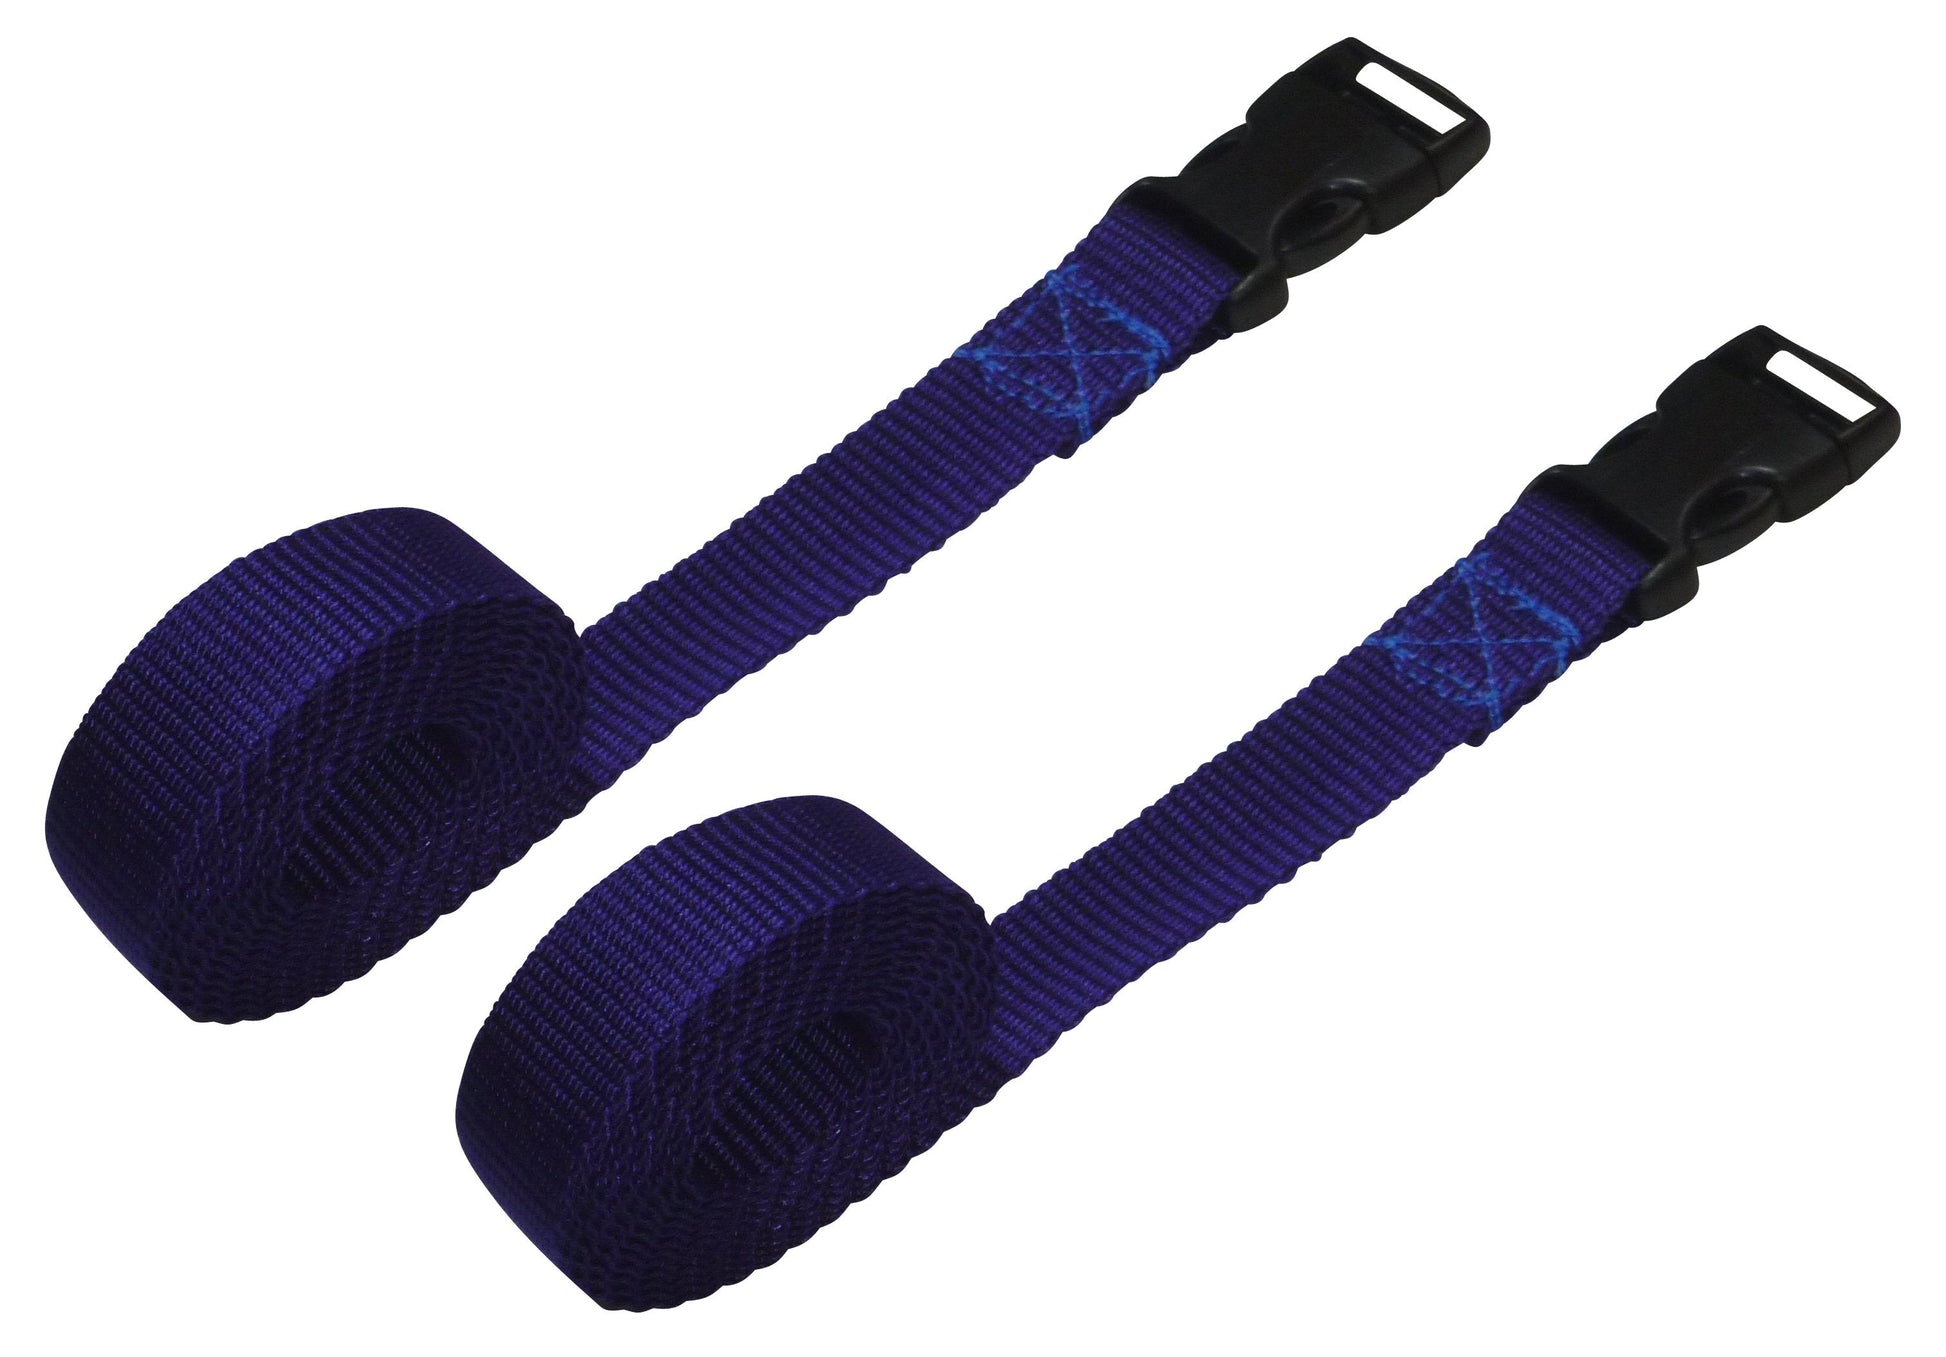 Benristraps 2 Pack Webbing Straps with Clips - Adjustable Luggage Straps in purple